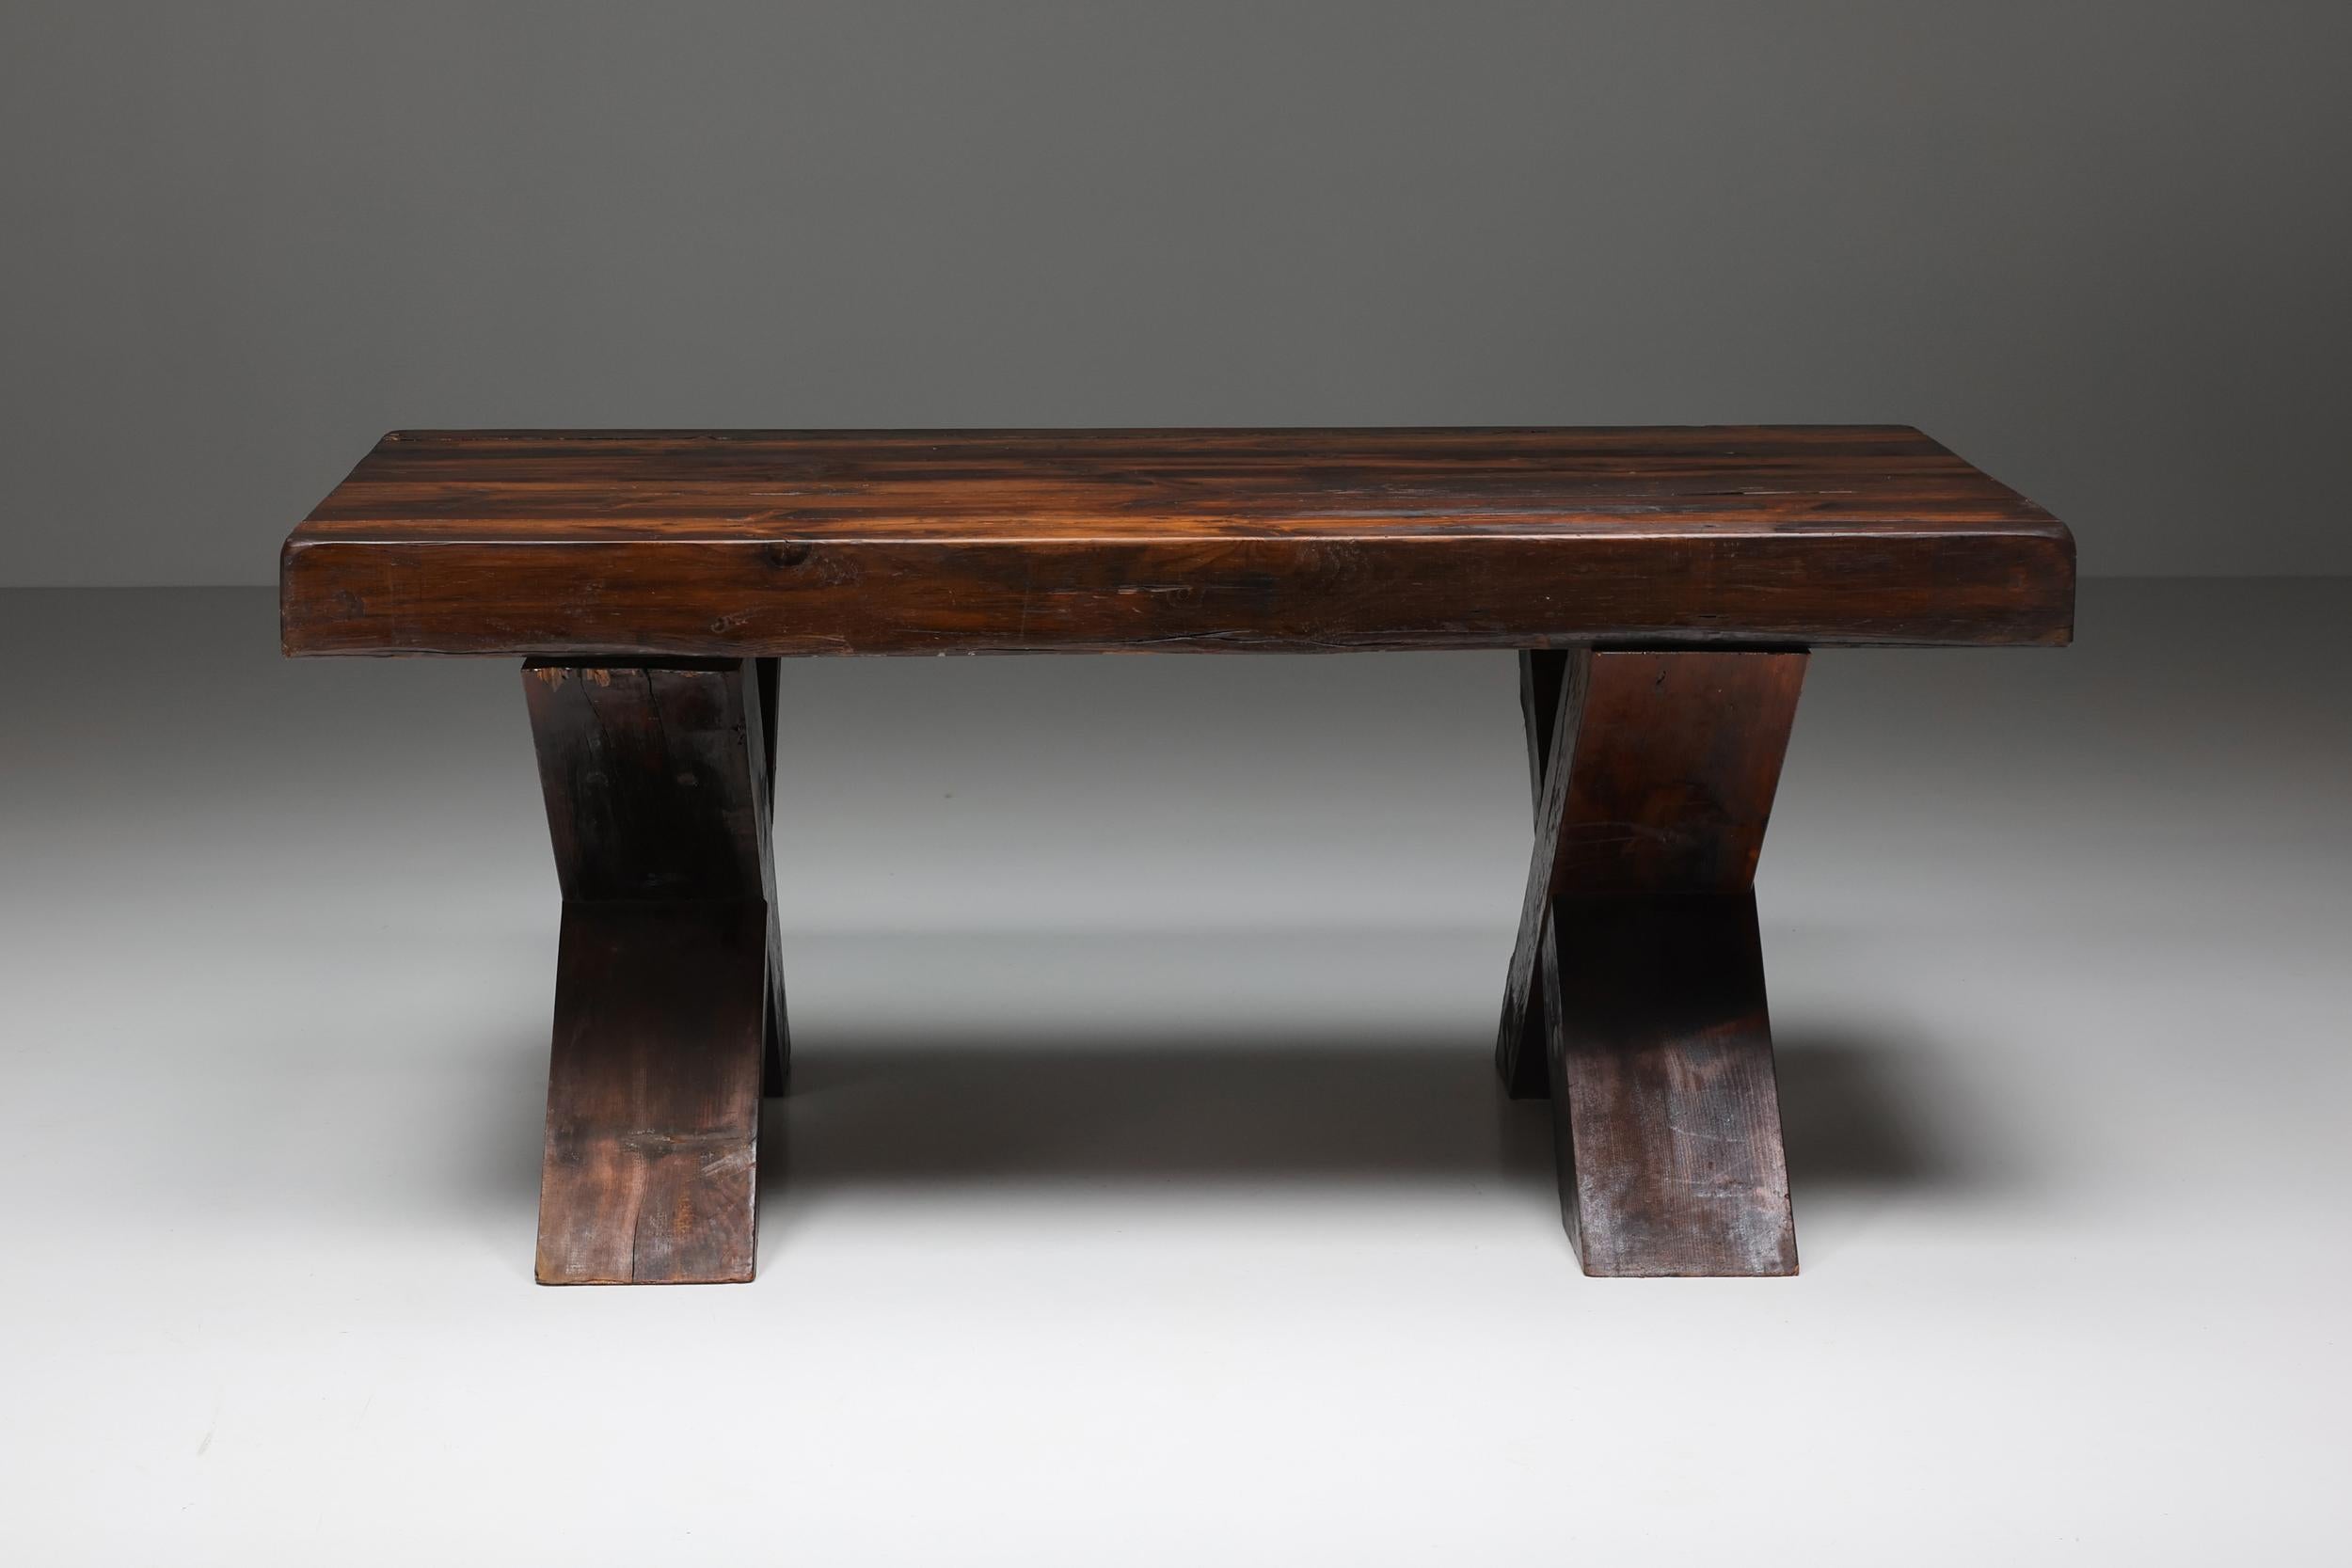 Italian Rustic Brutalist Dark Wooden Dining Table with X-Legs, Italy, 1940's For Sale